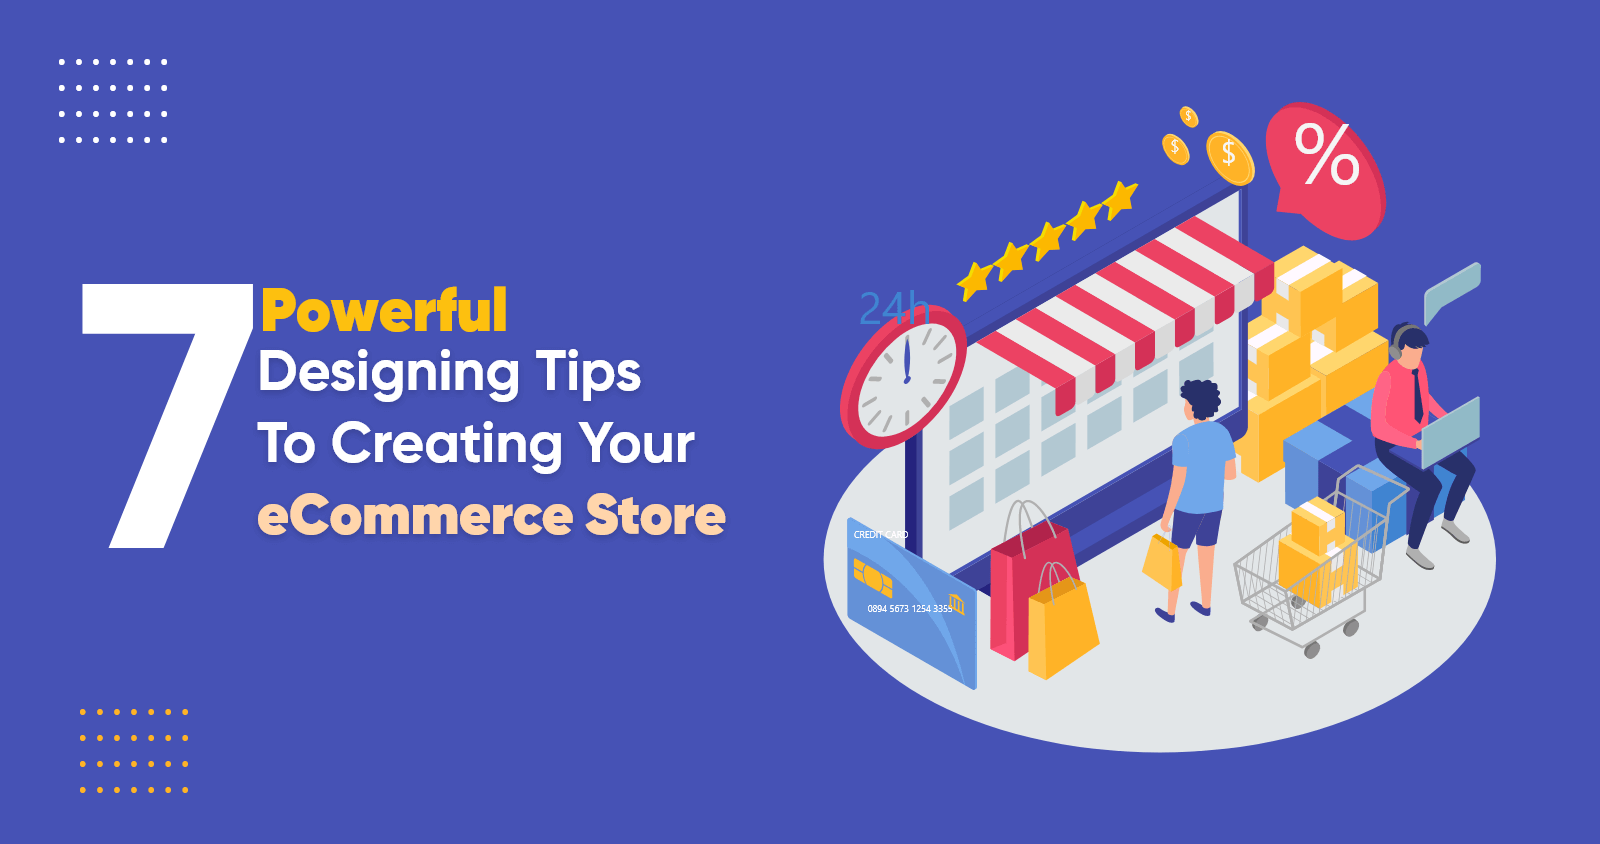 Designing Tips To Creating Your eCommerce Store